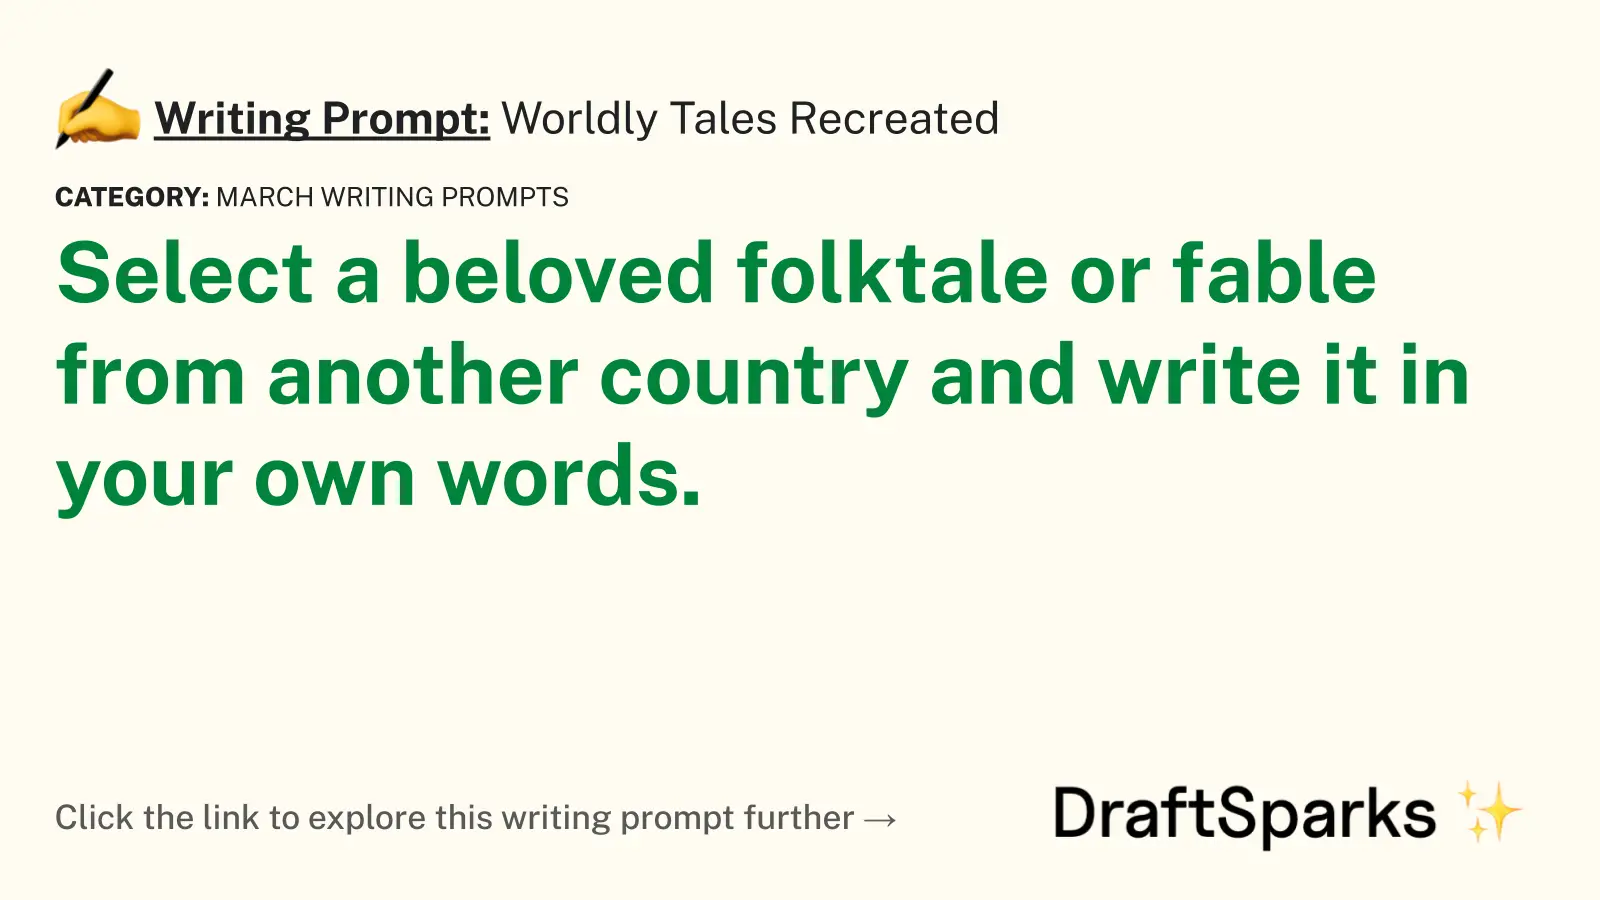 Worldly Tales Recreated